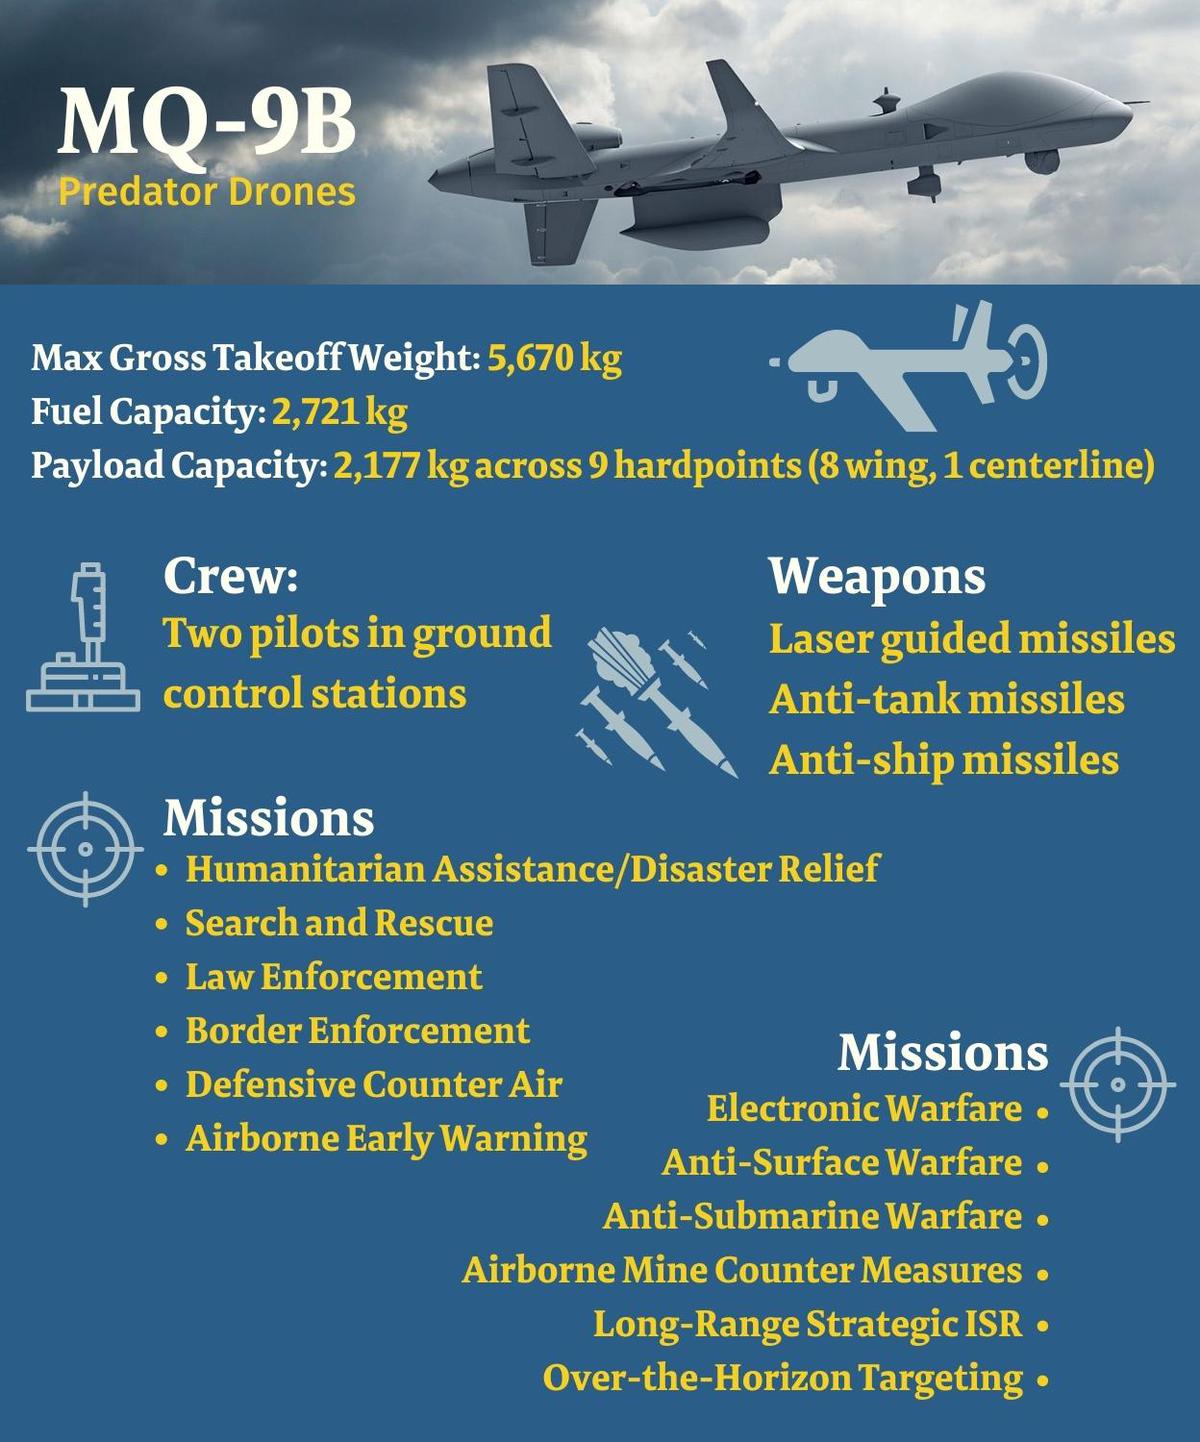 The India-U.S. deal for 31 MQ-9B drones | UPSC